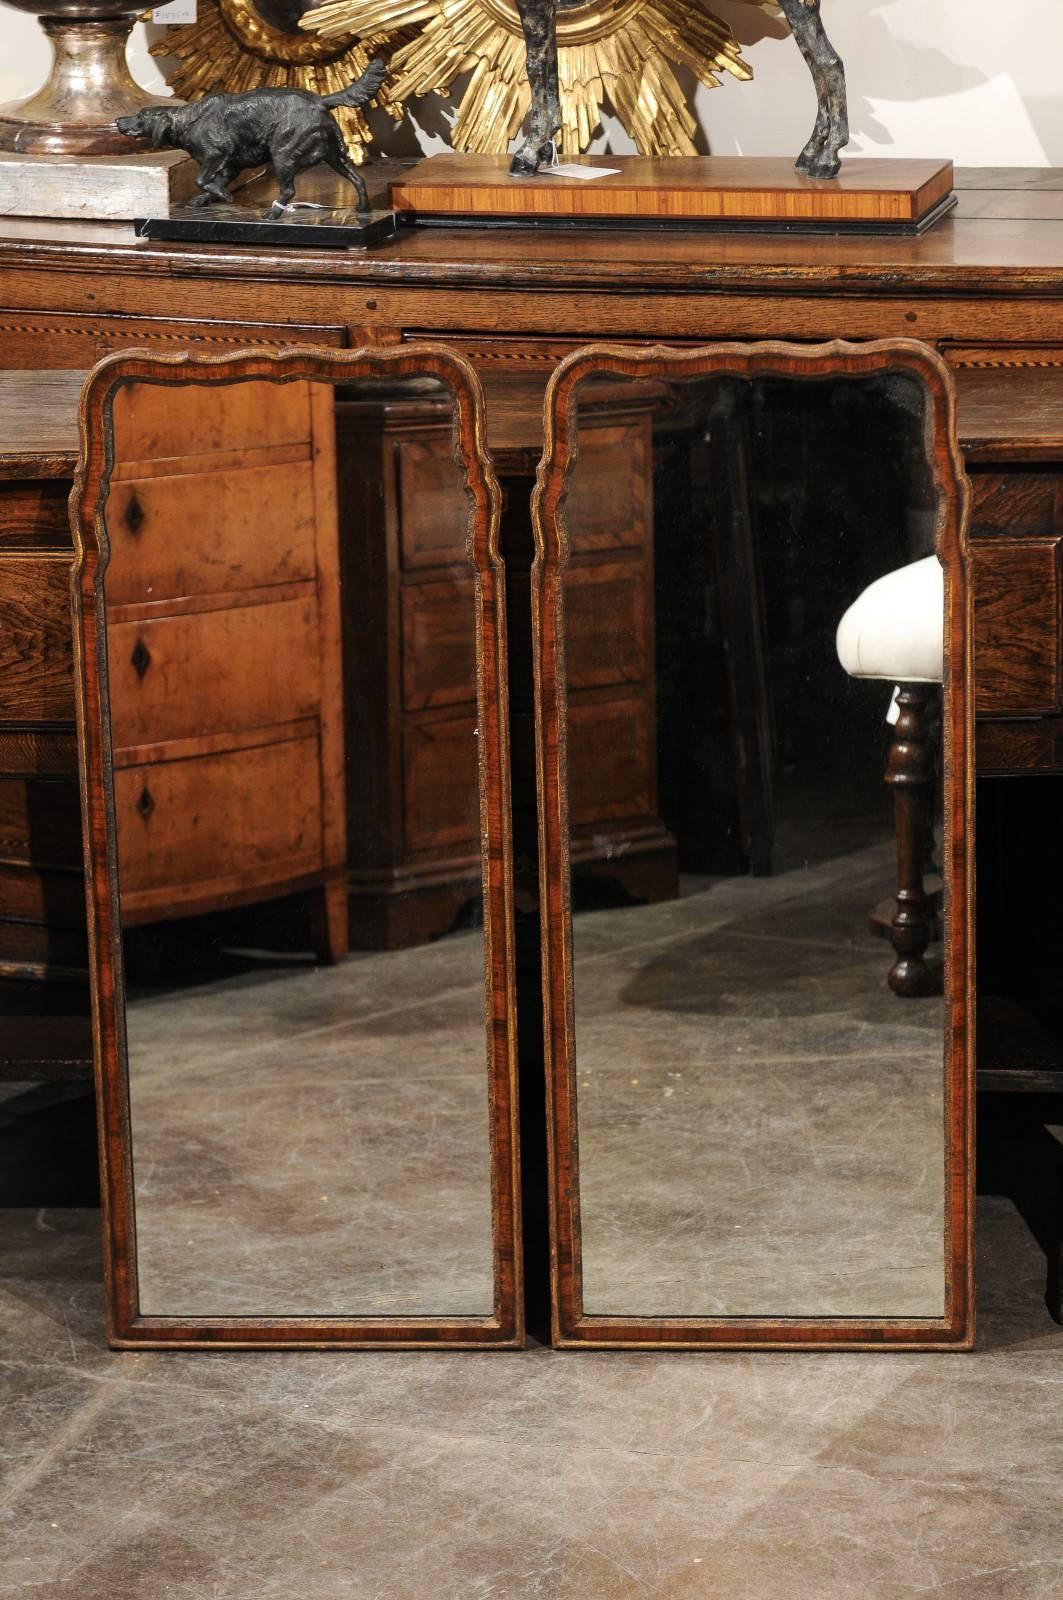 A pair of late 19th century English Queen Anne style narrow mirrors. This pair of English walnut mirrors from circa 1880 features a nice vertical, narrow Silhouette. The crest is curved, in typical Queen Anne manner. The frame is made of burled